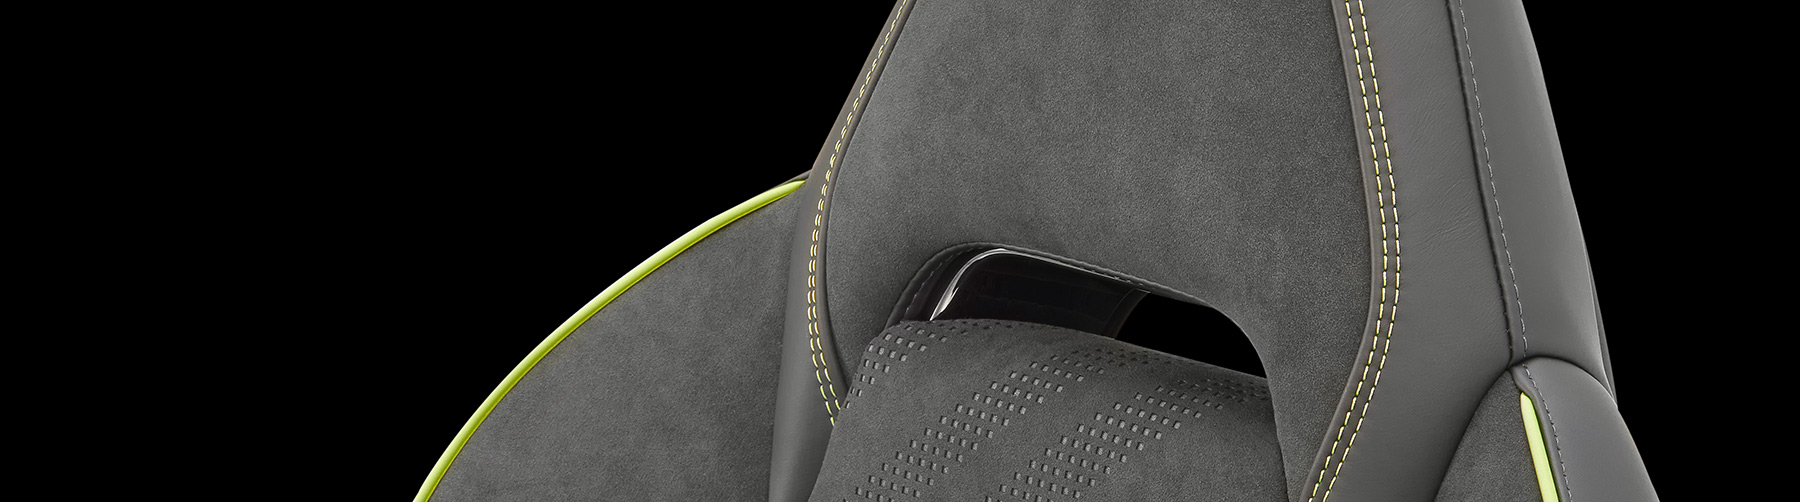 Close up of the material and trim on a head rest of a car seat